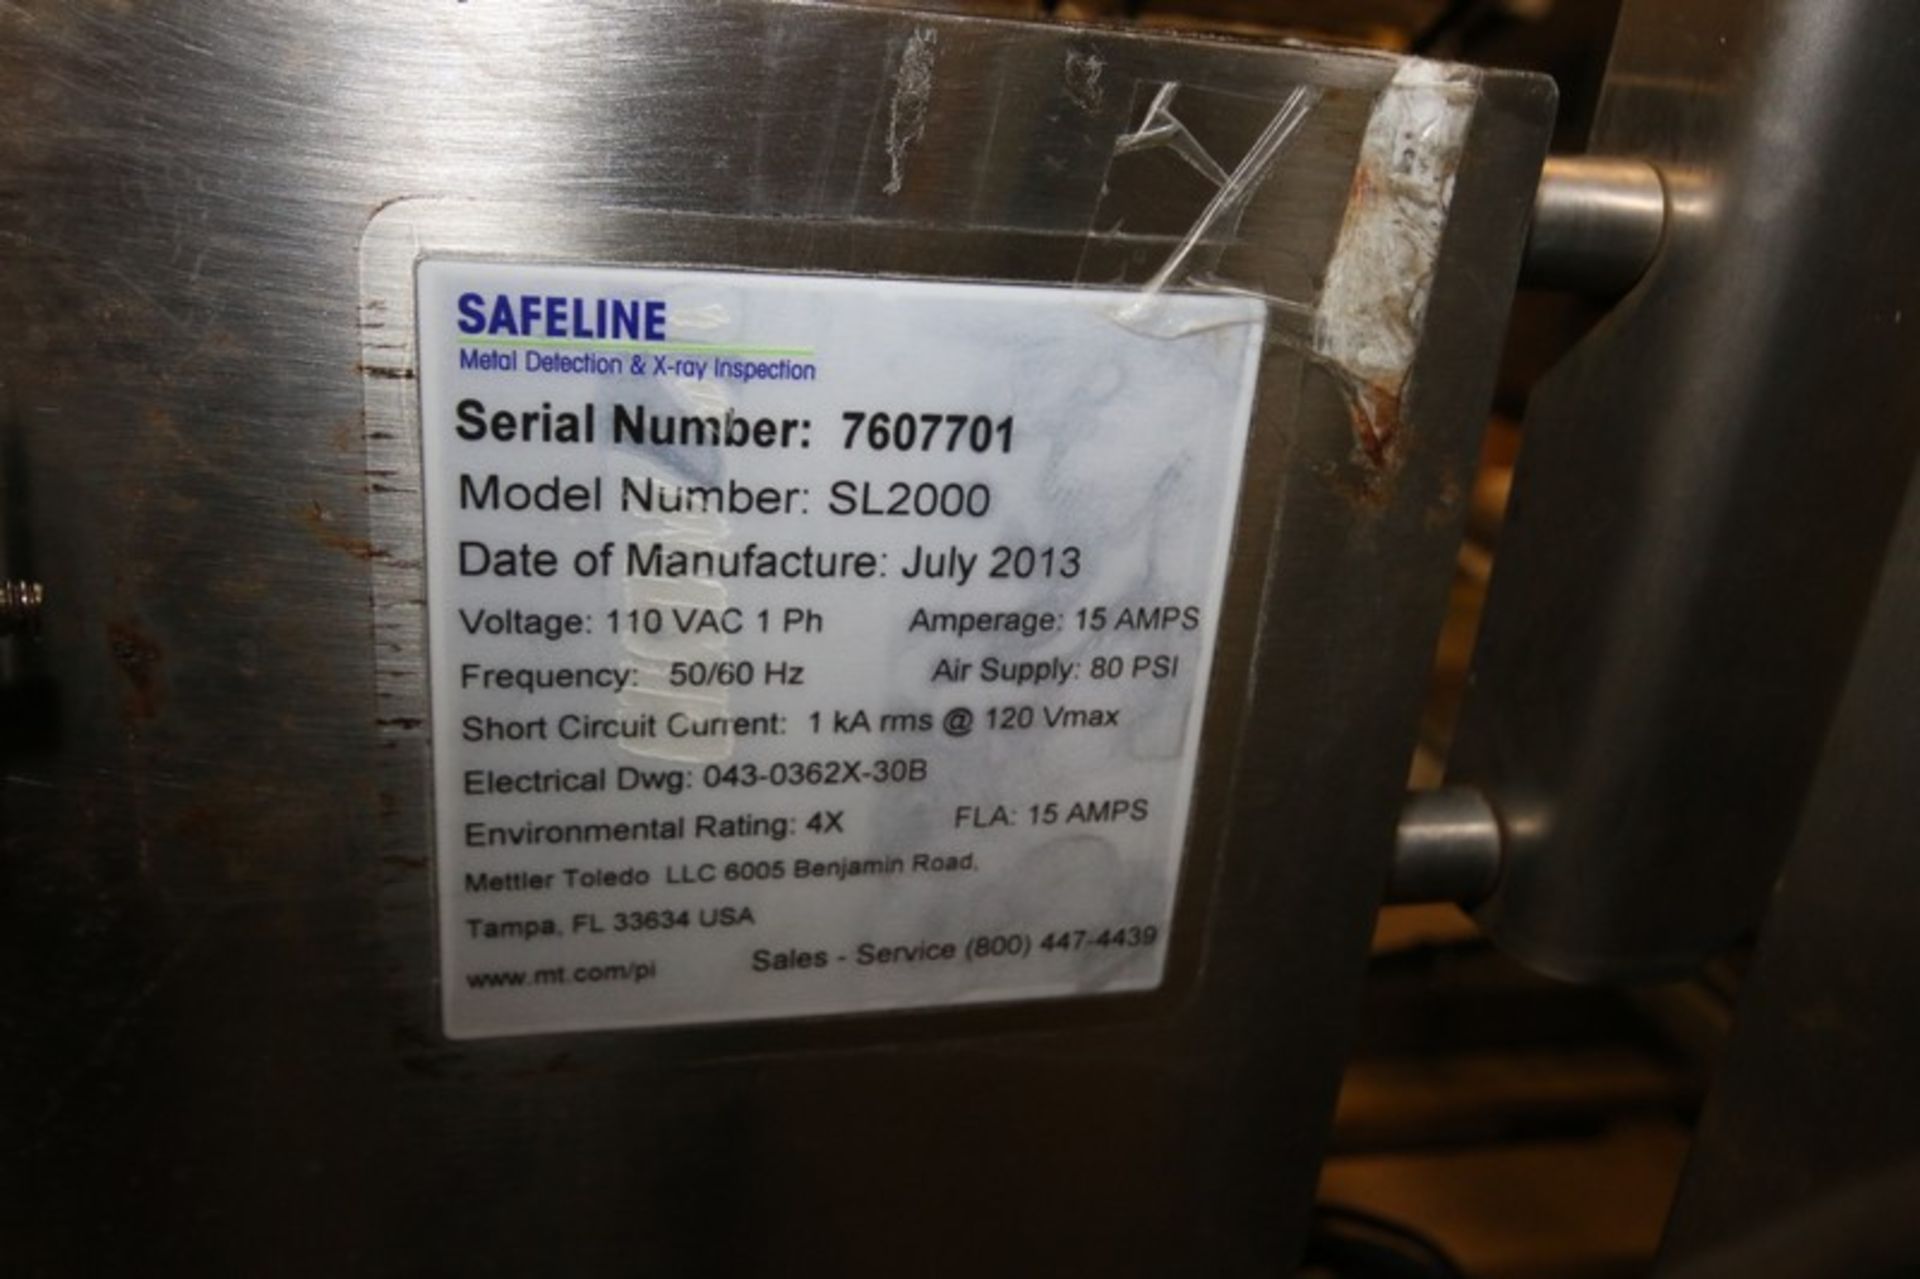 Safeline S/S Metal Detector / Conveyor System, Model SL2000, SN 7907701, with 3" W x 4" H Product - Image 9 of 9